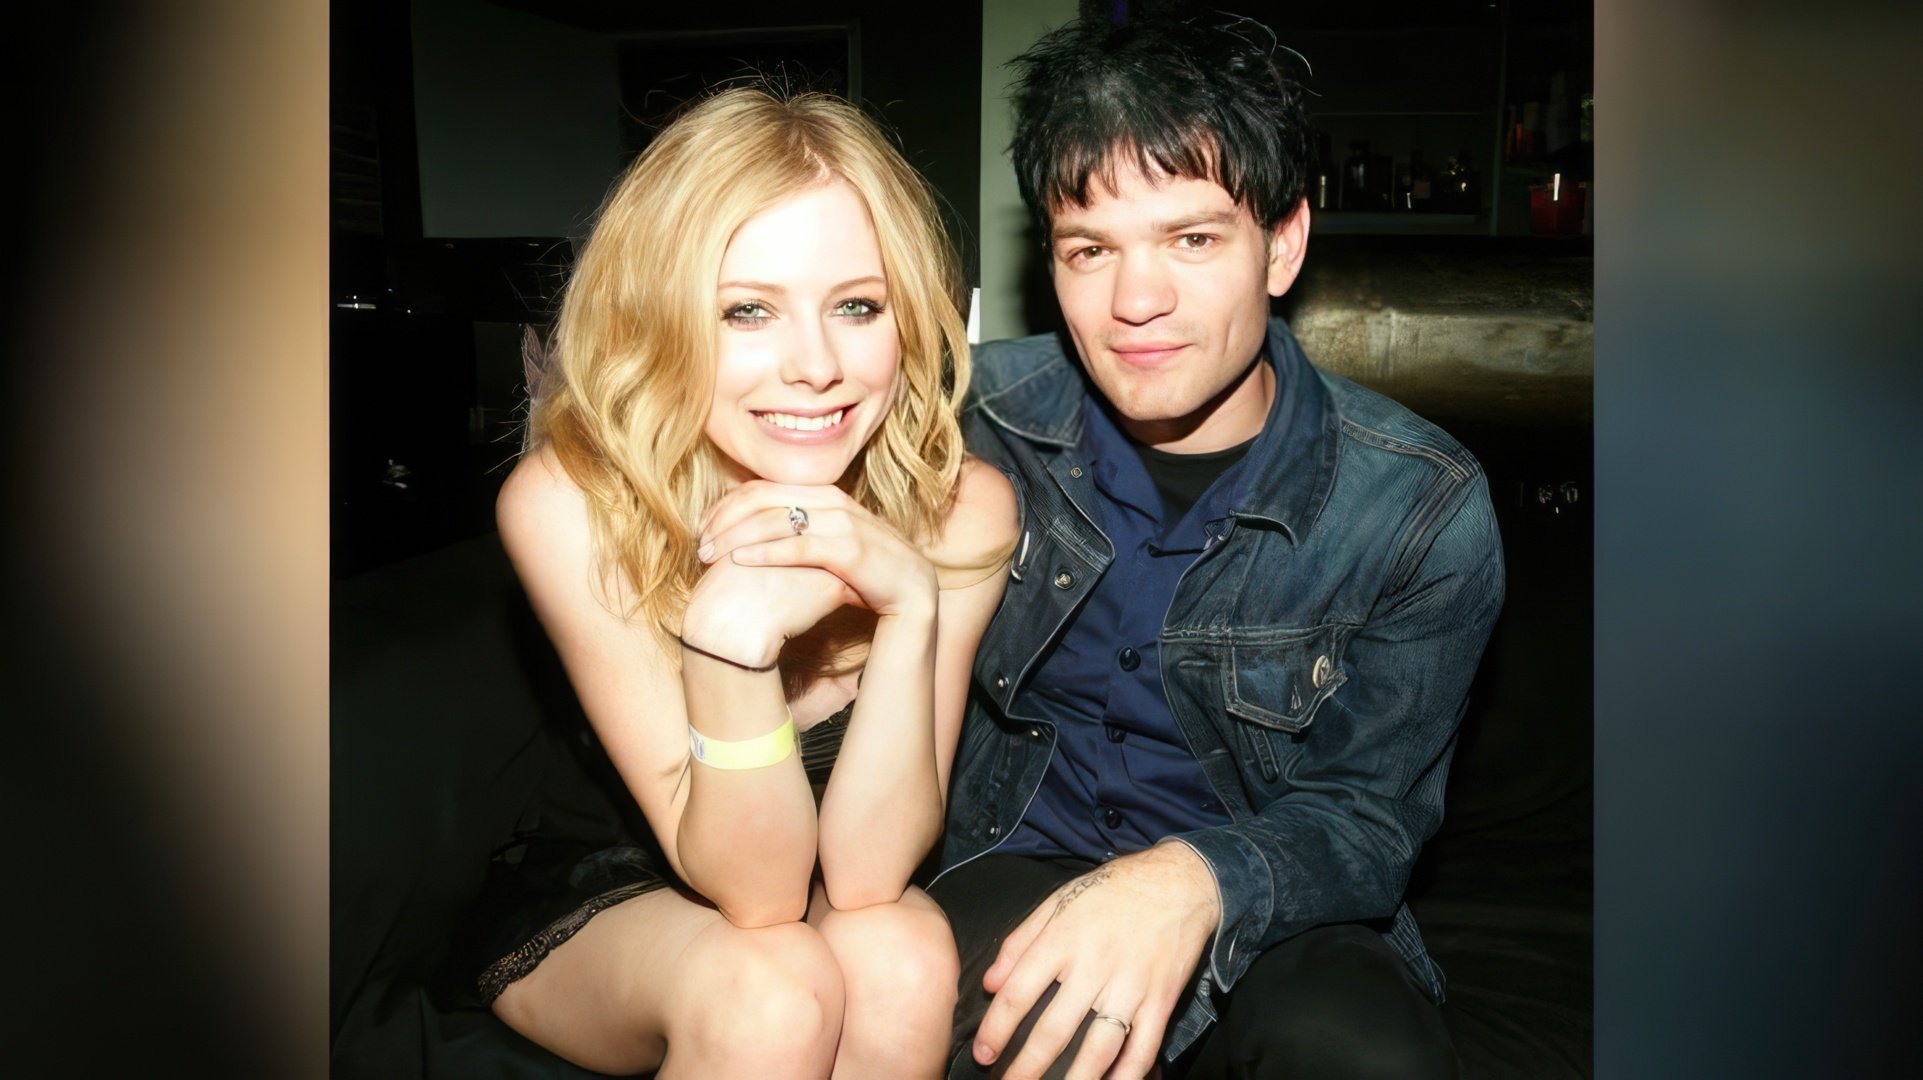 Avril Lavigne and the leader of Sum 41